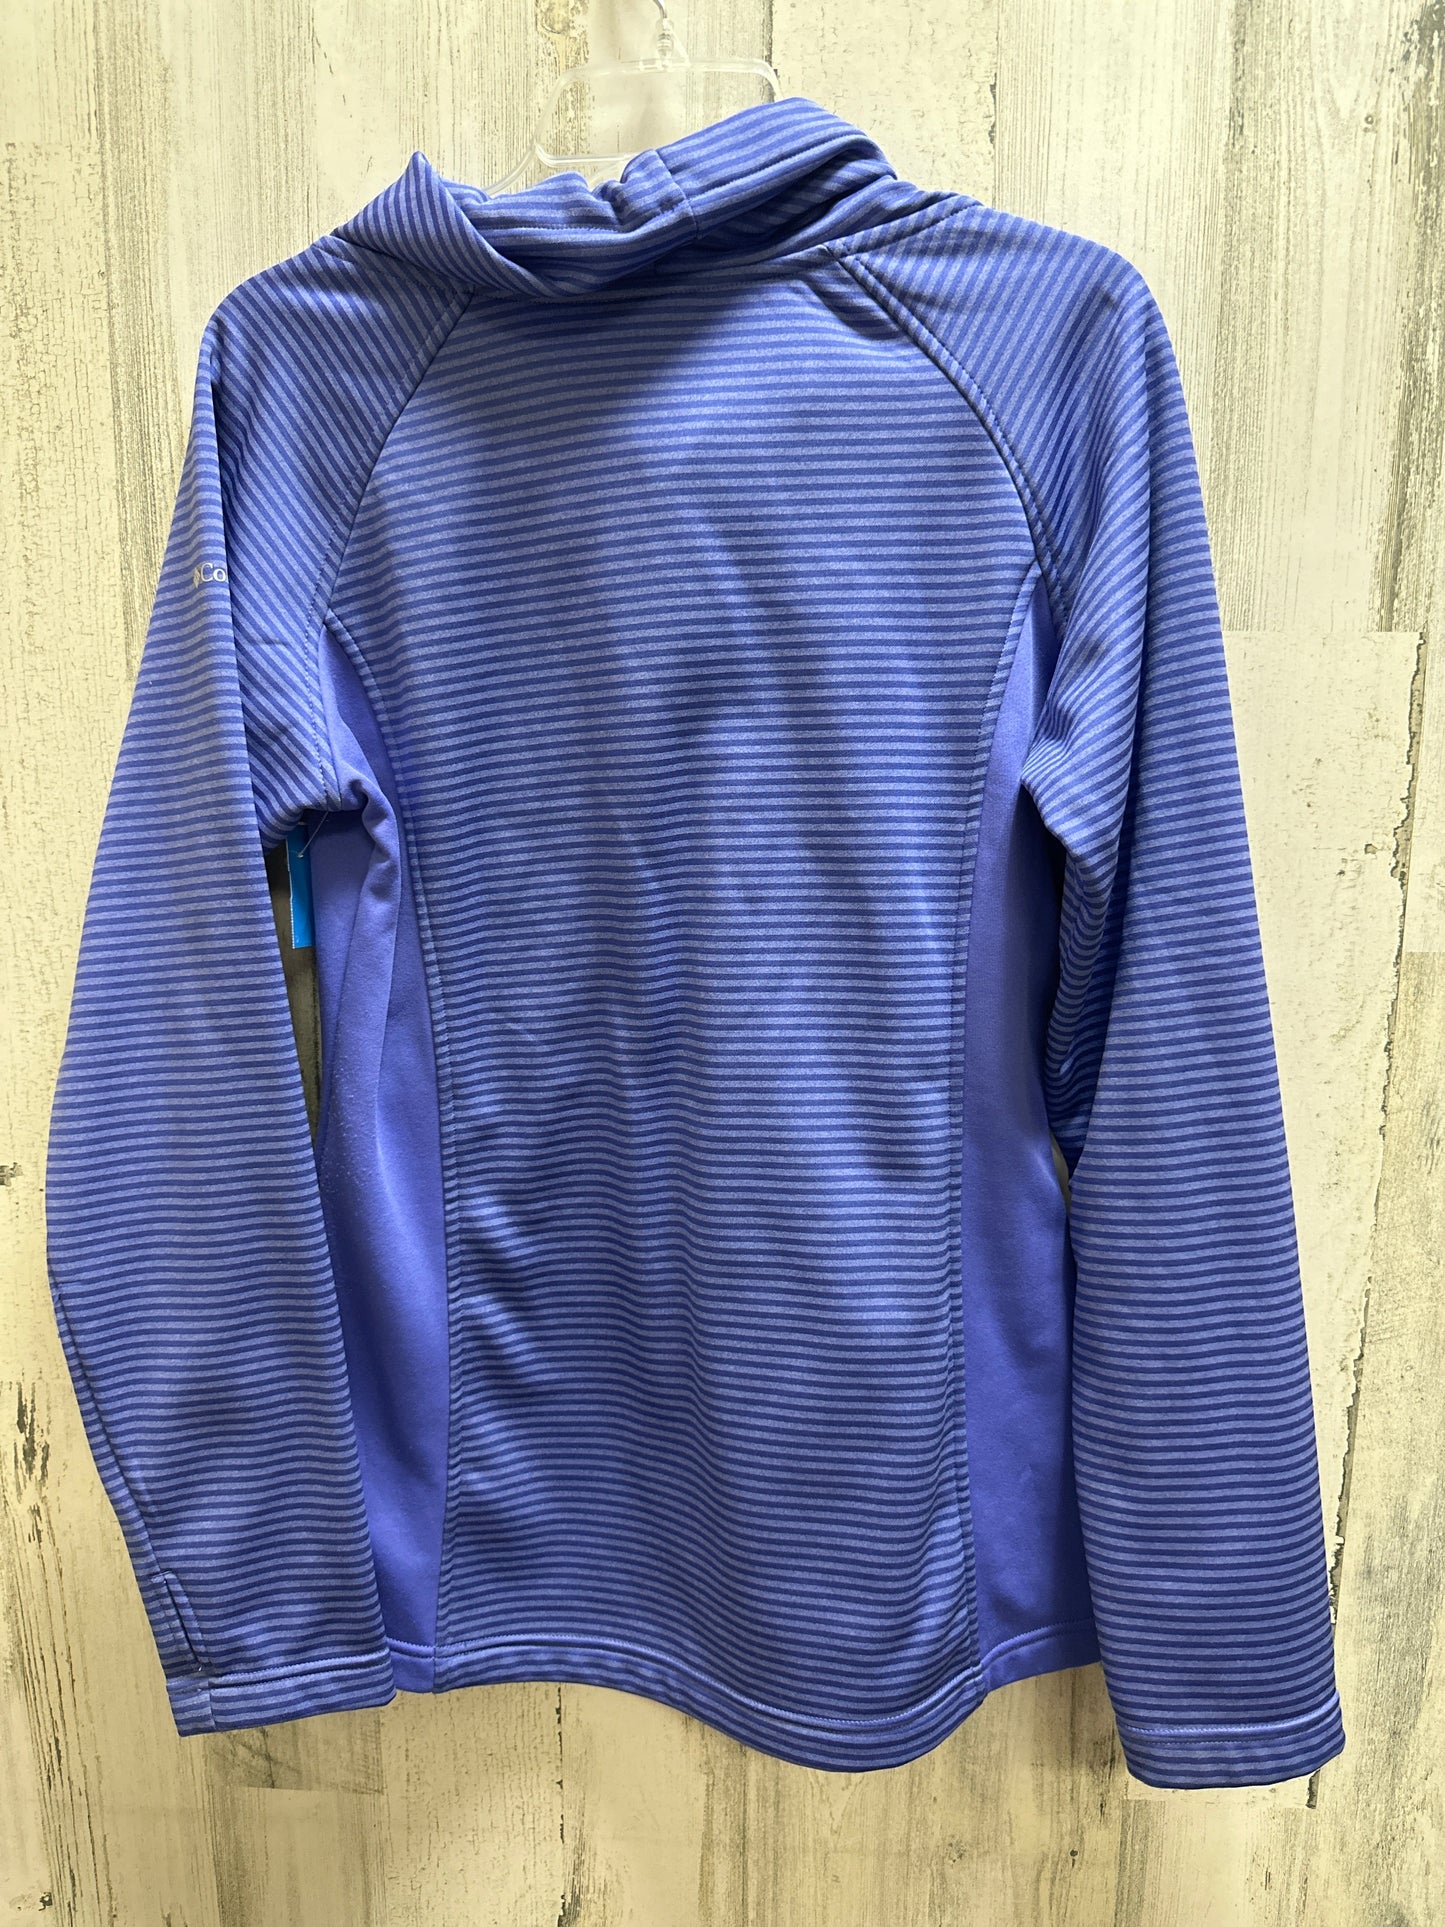 Athletic Top Long Sleeve Collar By Columbia  Size: M